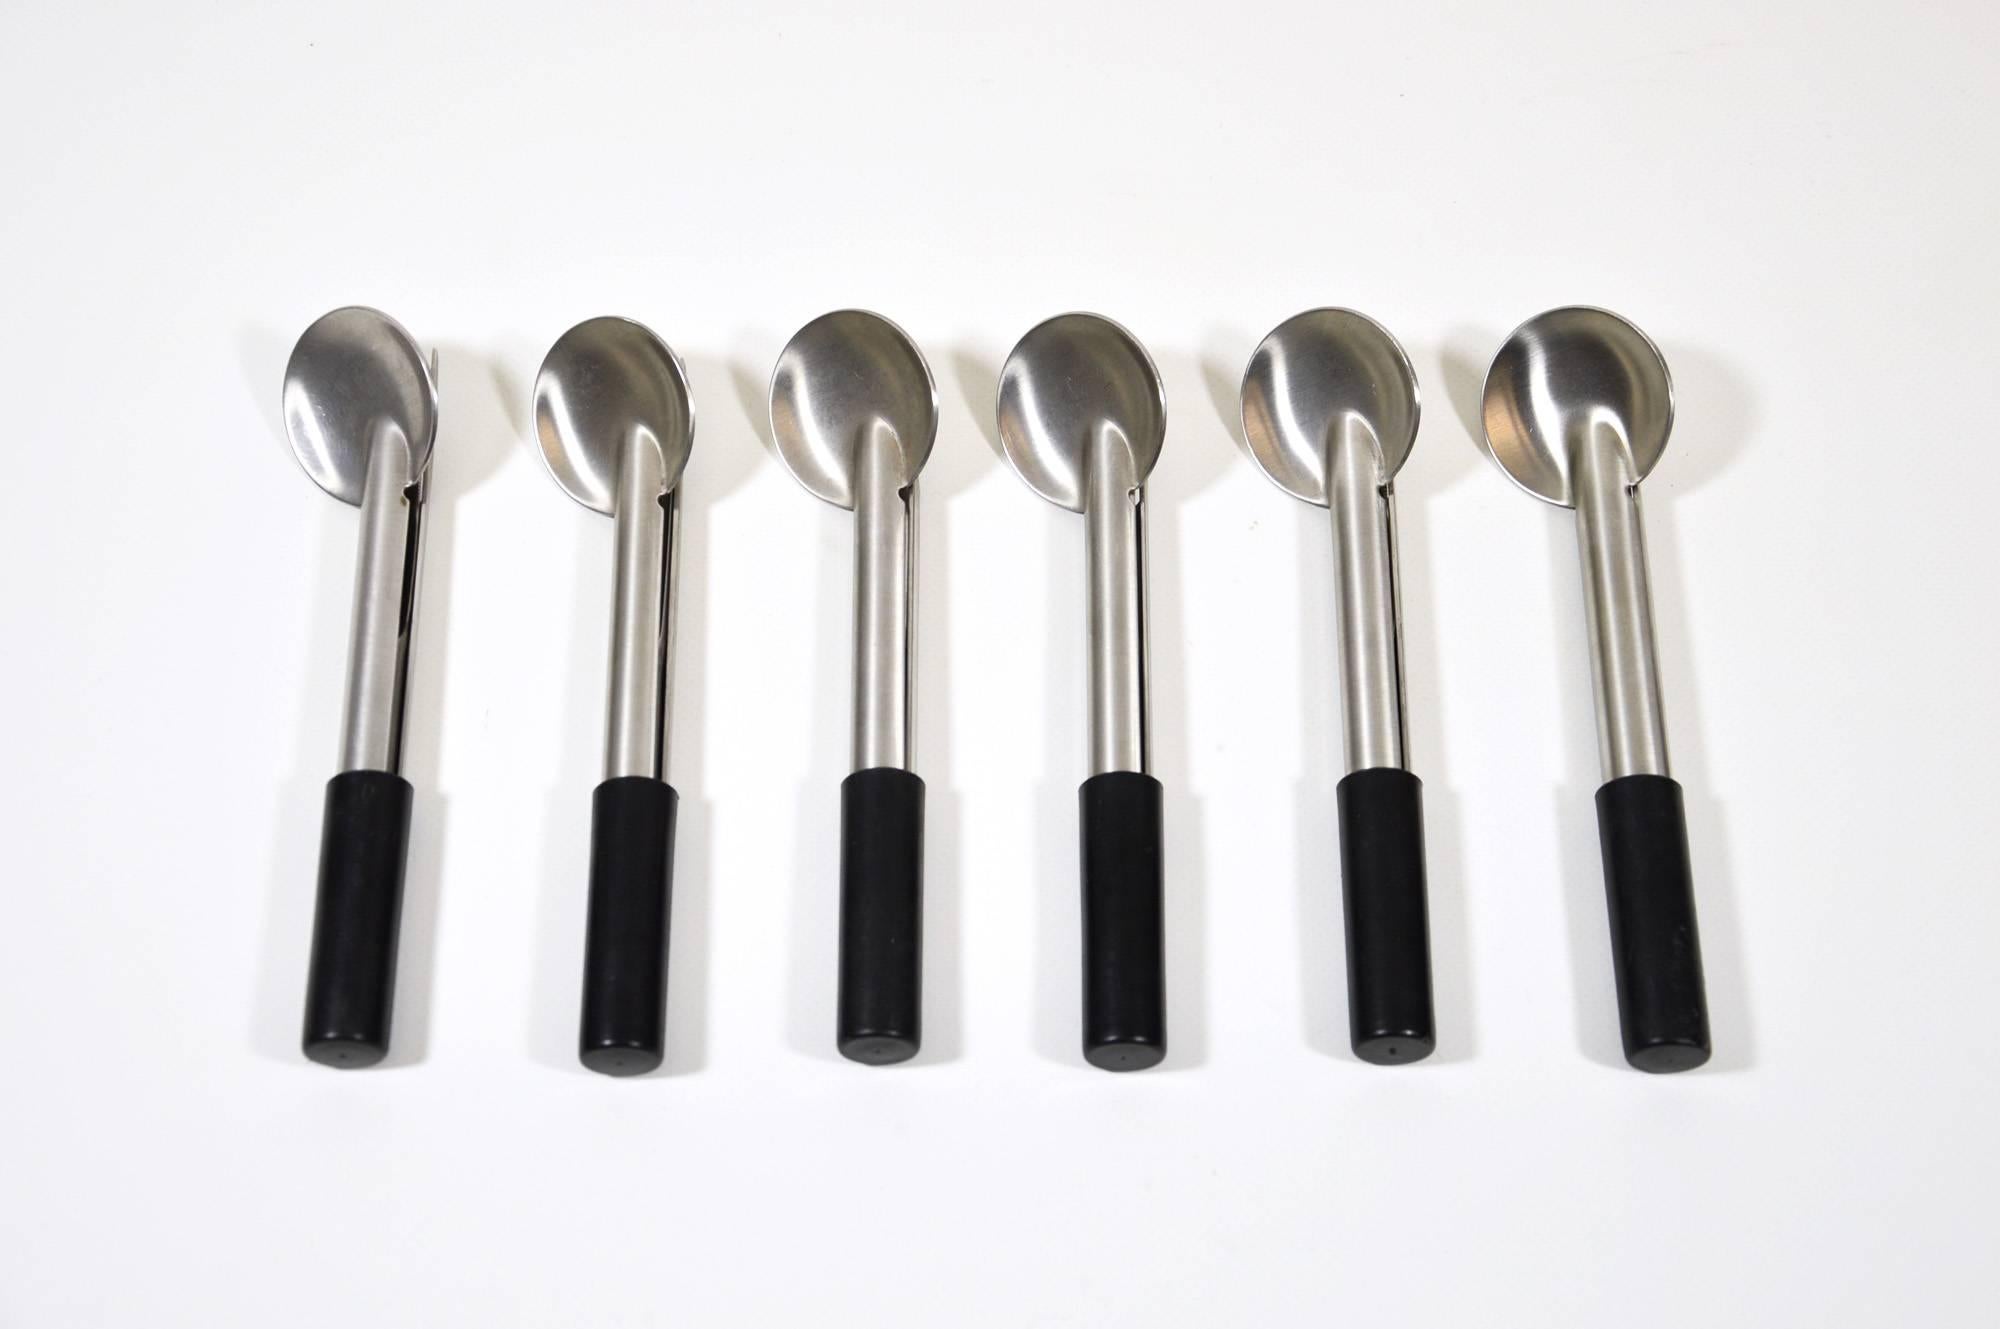 This innovative cutlery set made of brushed stainless steel was designed by Carla Nencioni and Armando Moleri for Zani in 1971.
It offers an unique way to set the table: in fact, the three futuristic shaped cutlery pieces are held together by a